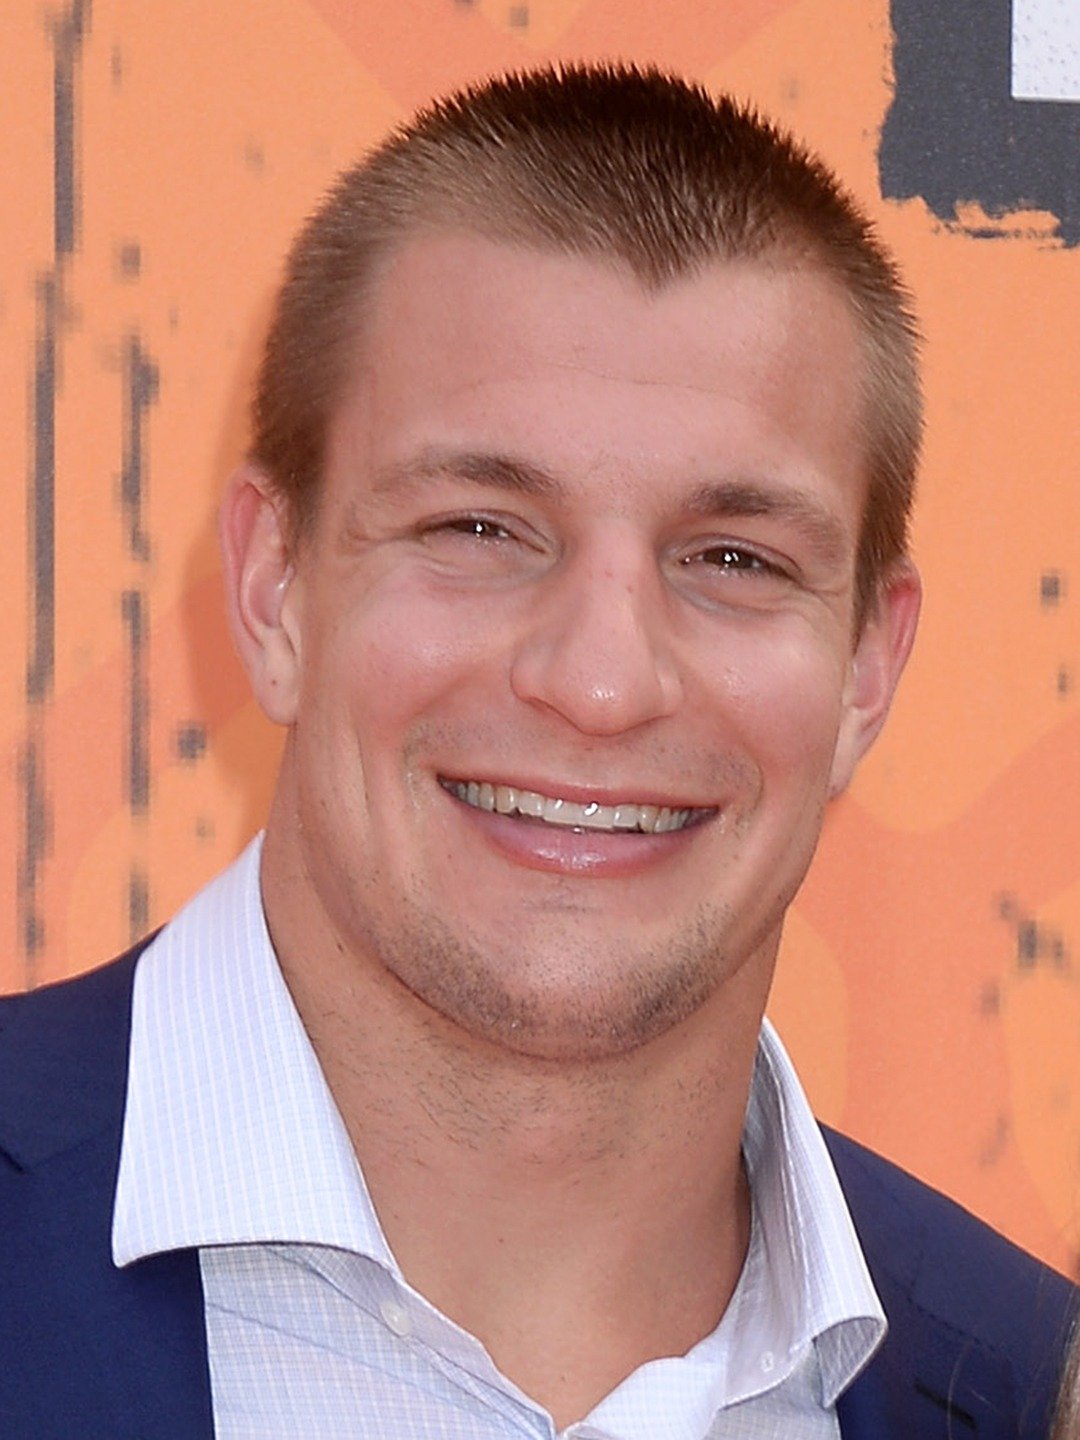 How tall is Rob Gronkowski?